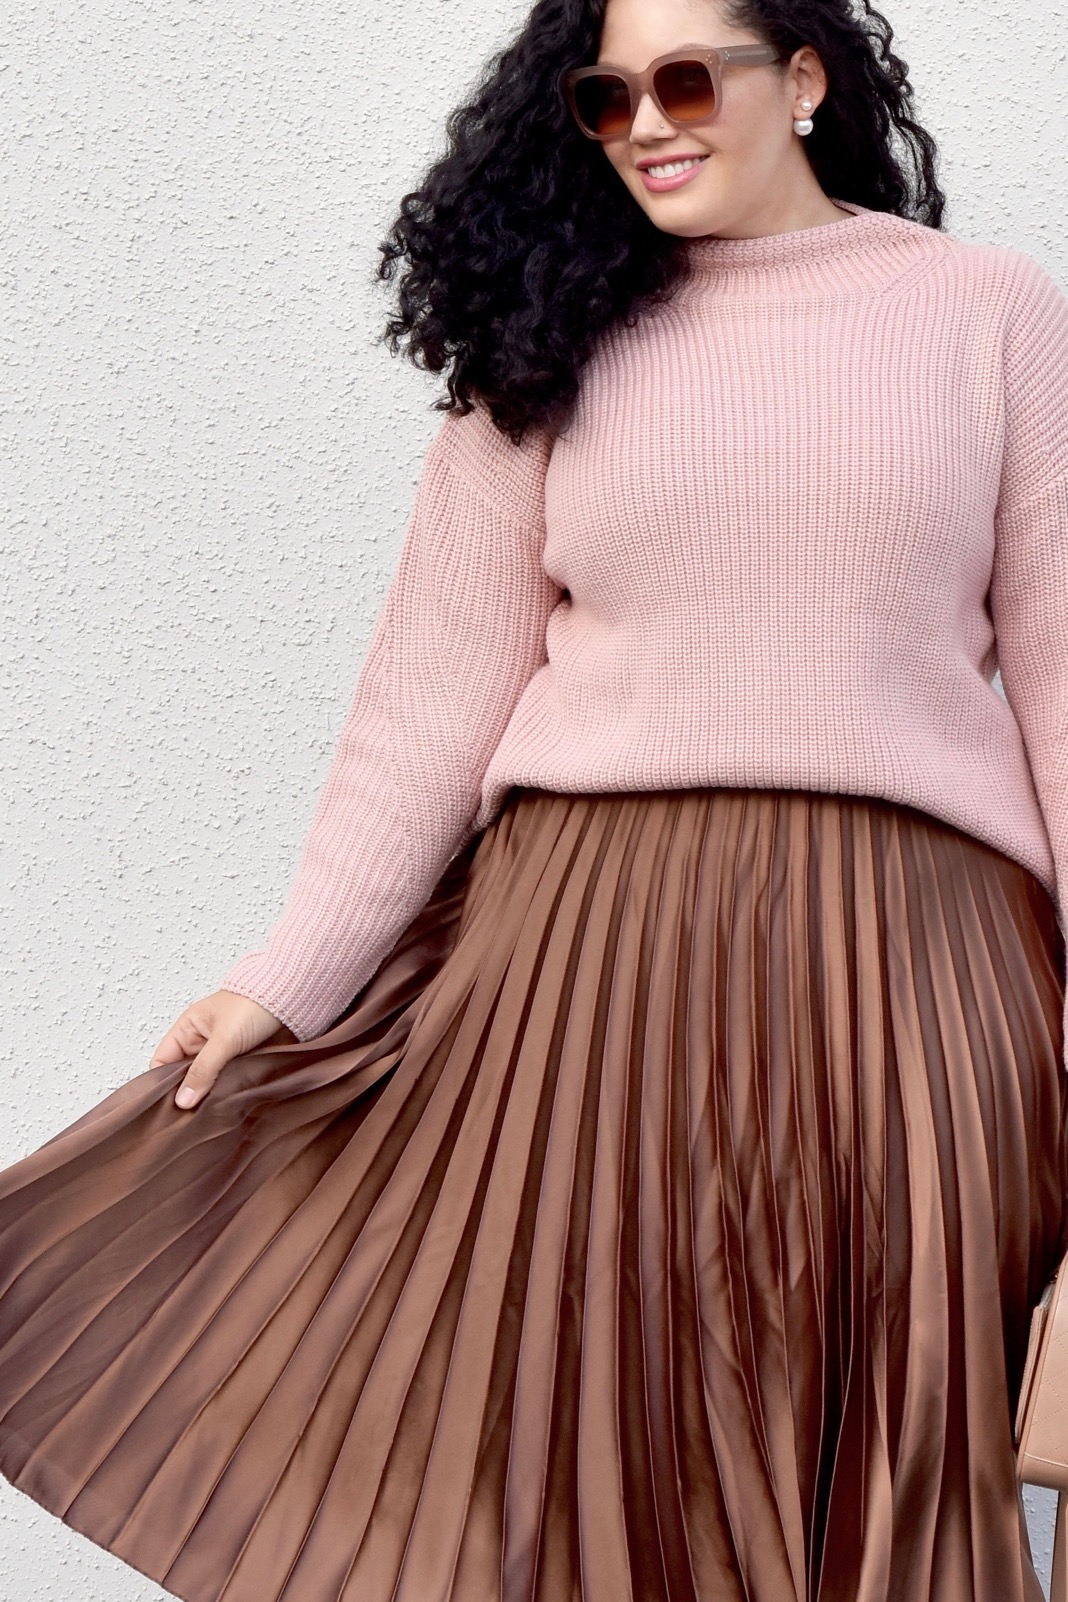 Girl With Curves blogger Tanesha Awasthi wears a Satin Skirt and high neck sweater.